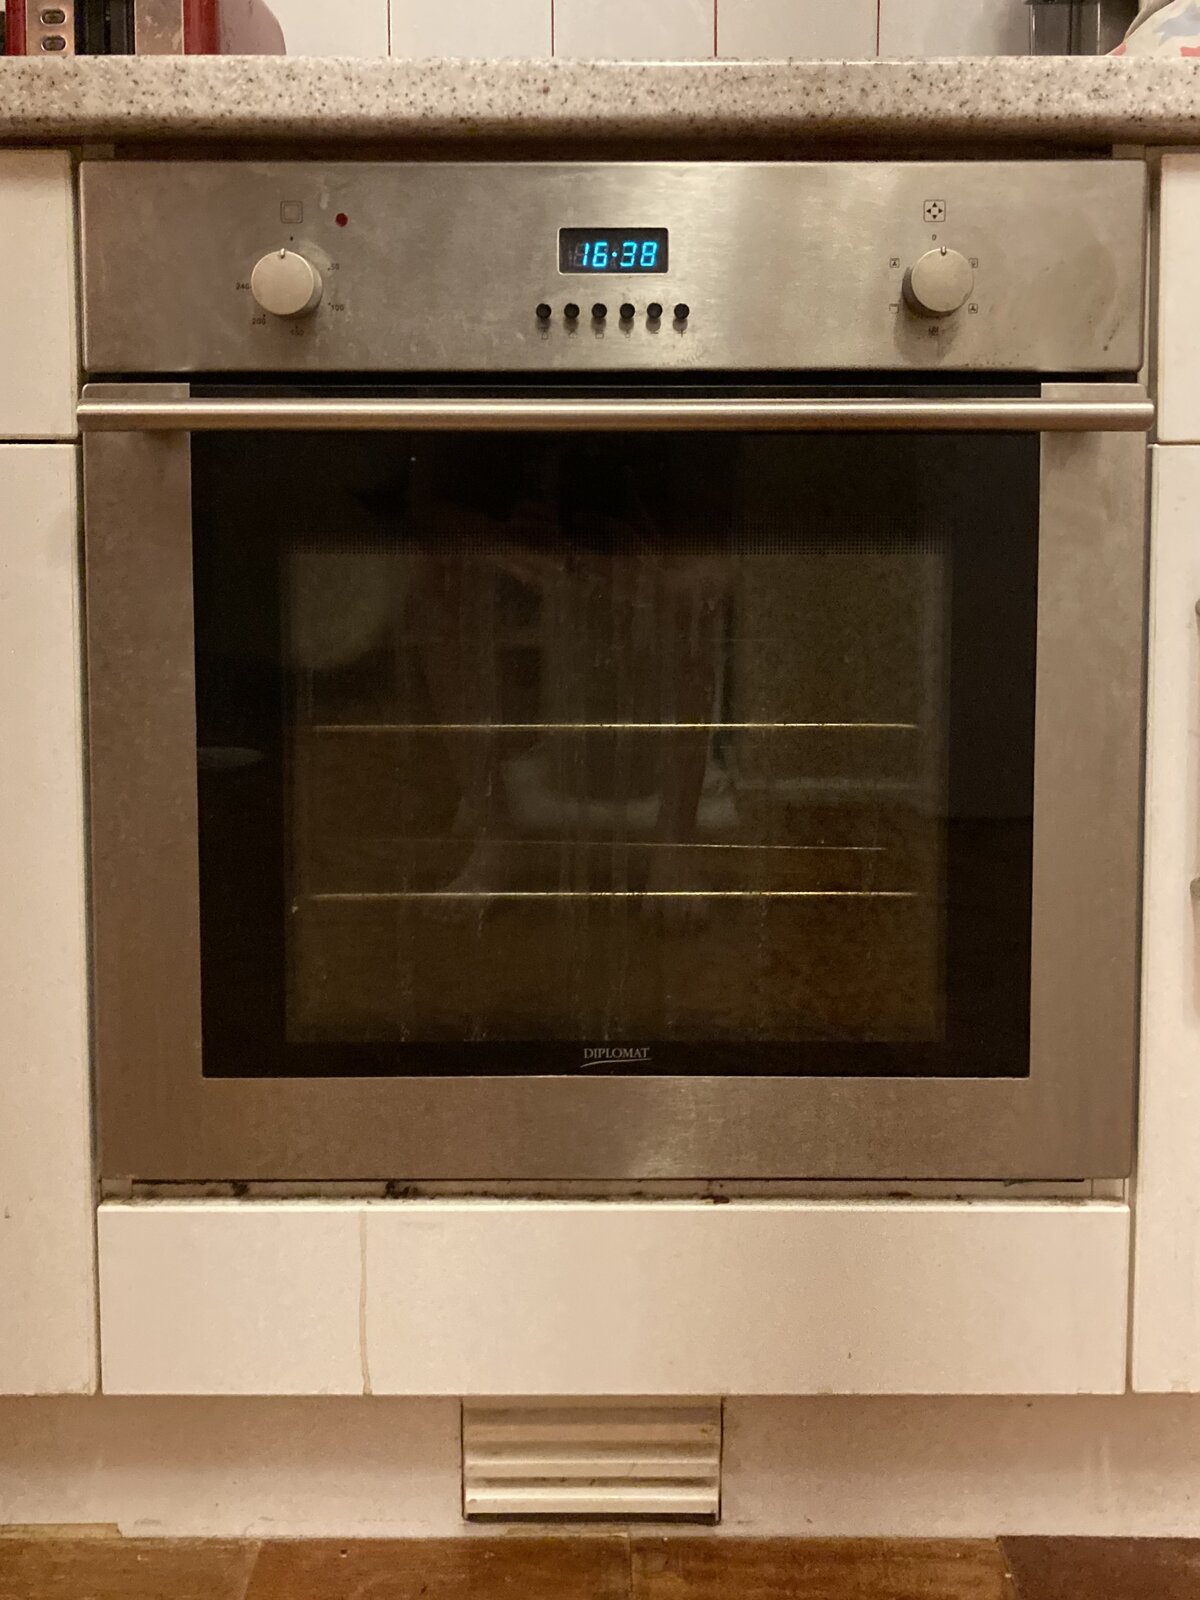 How to Replace the Oven Thermostat in a Diplomat Cooker 